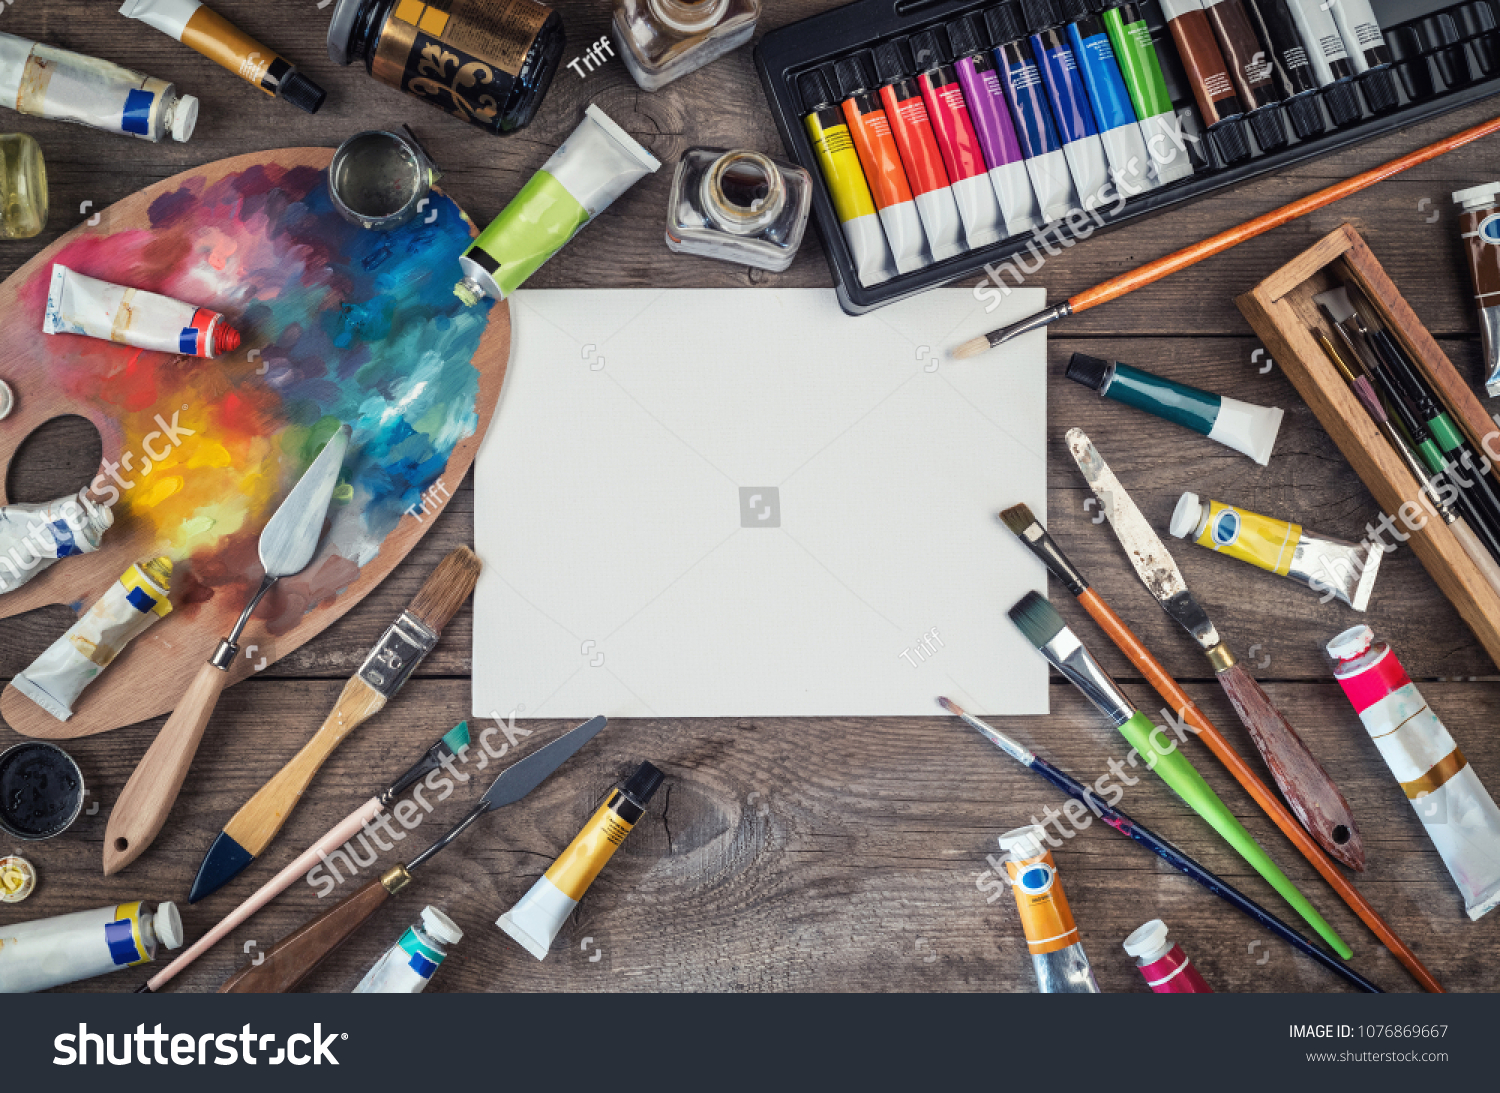 Set of artist accessories collection. Canvas, tube of oil paint, art brushes, palette knife lying on the wood table. Artist workshop background. #1076869667